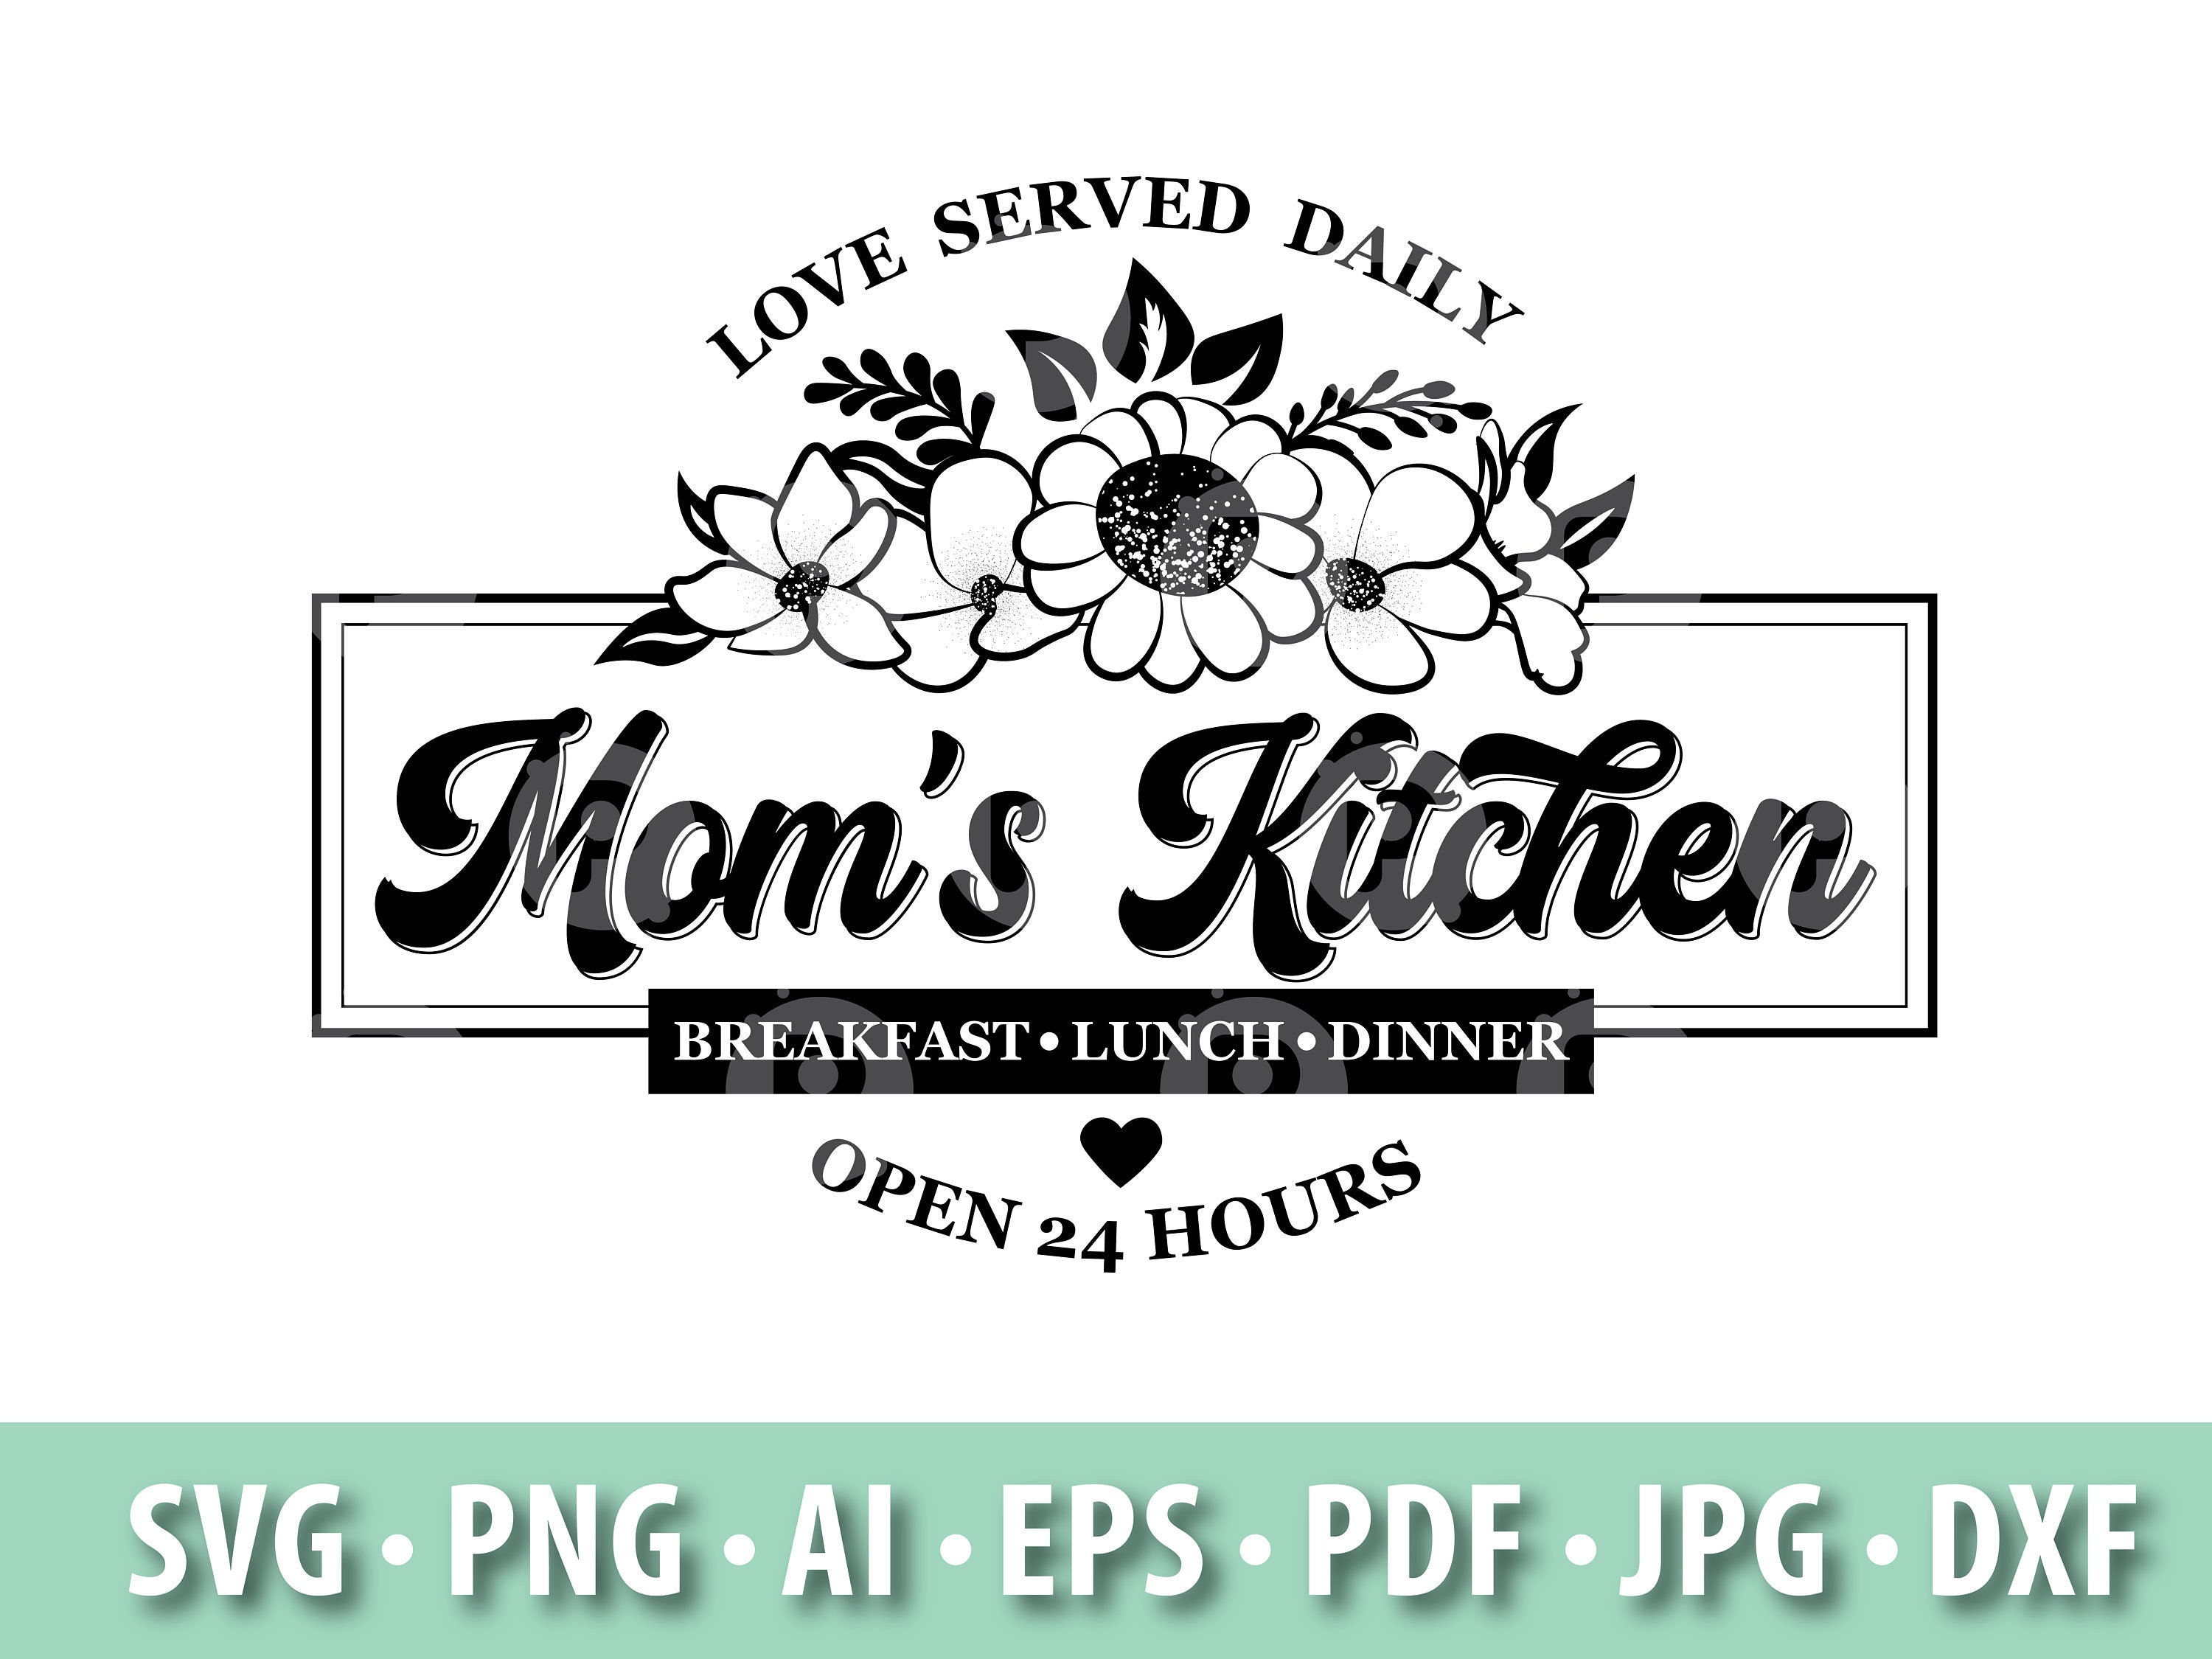 Mom-Mom's Kitchen is opening this winter on South Street